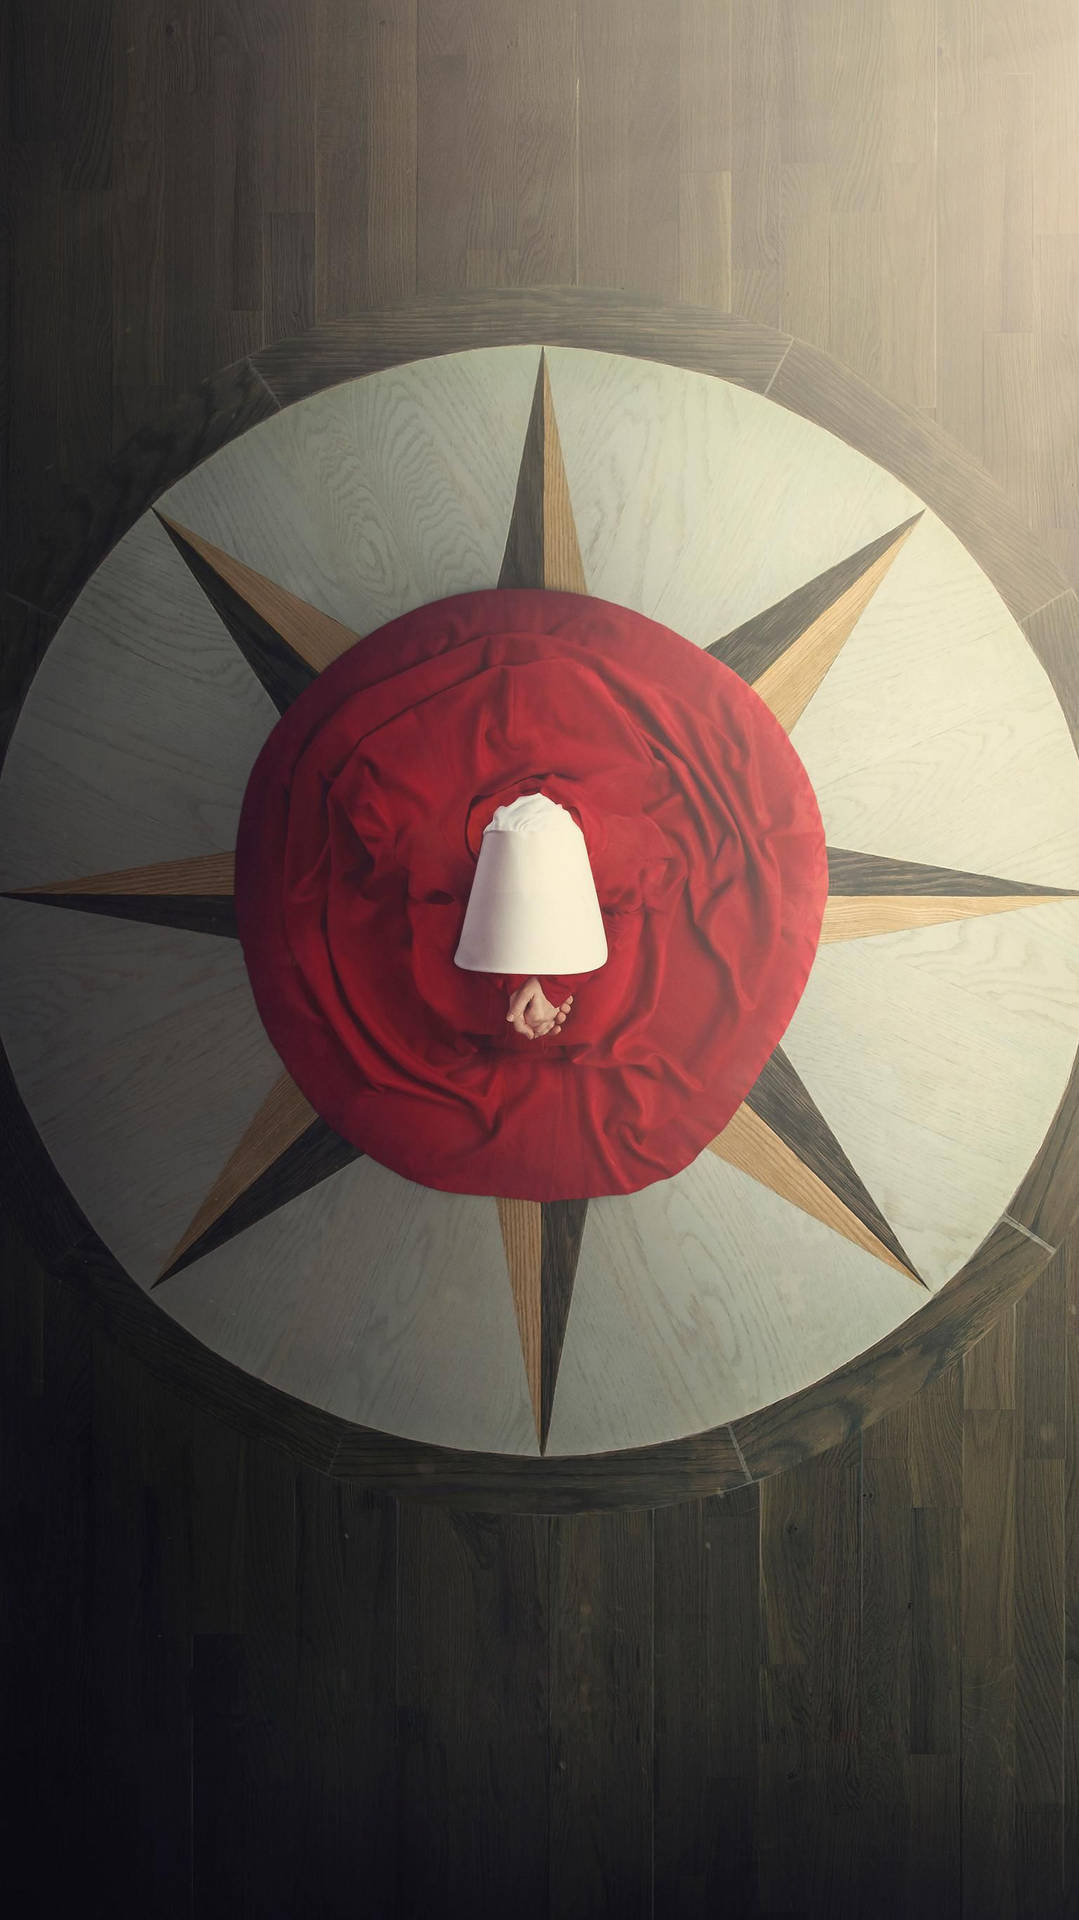 The Handmaid's Tale Compass Points Background